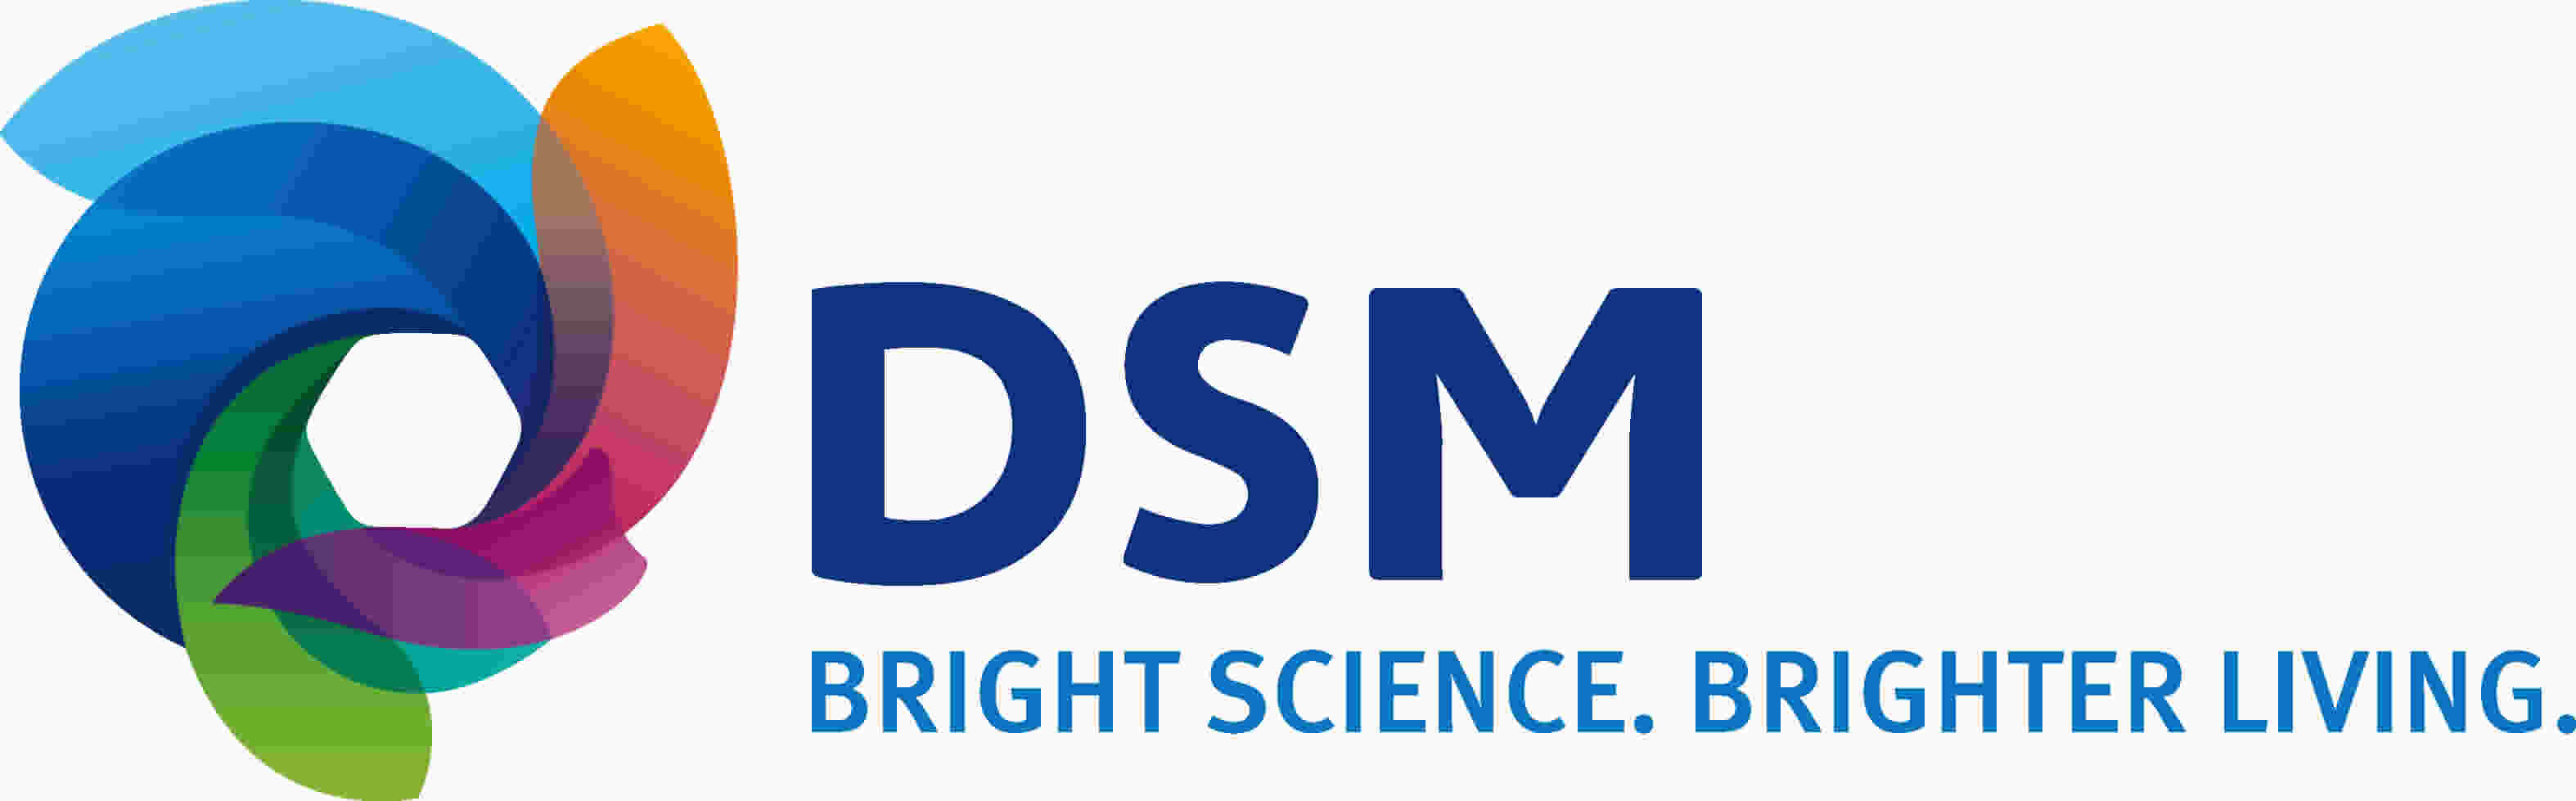 DSM Nutritional Products Europe Ltd